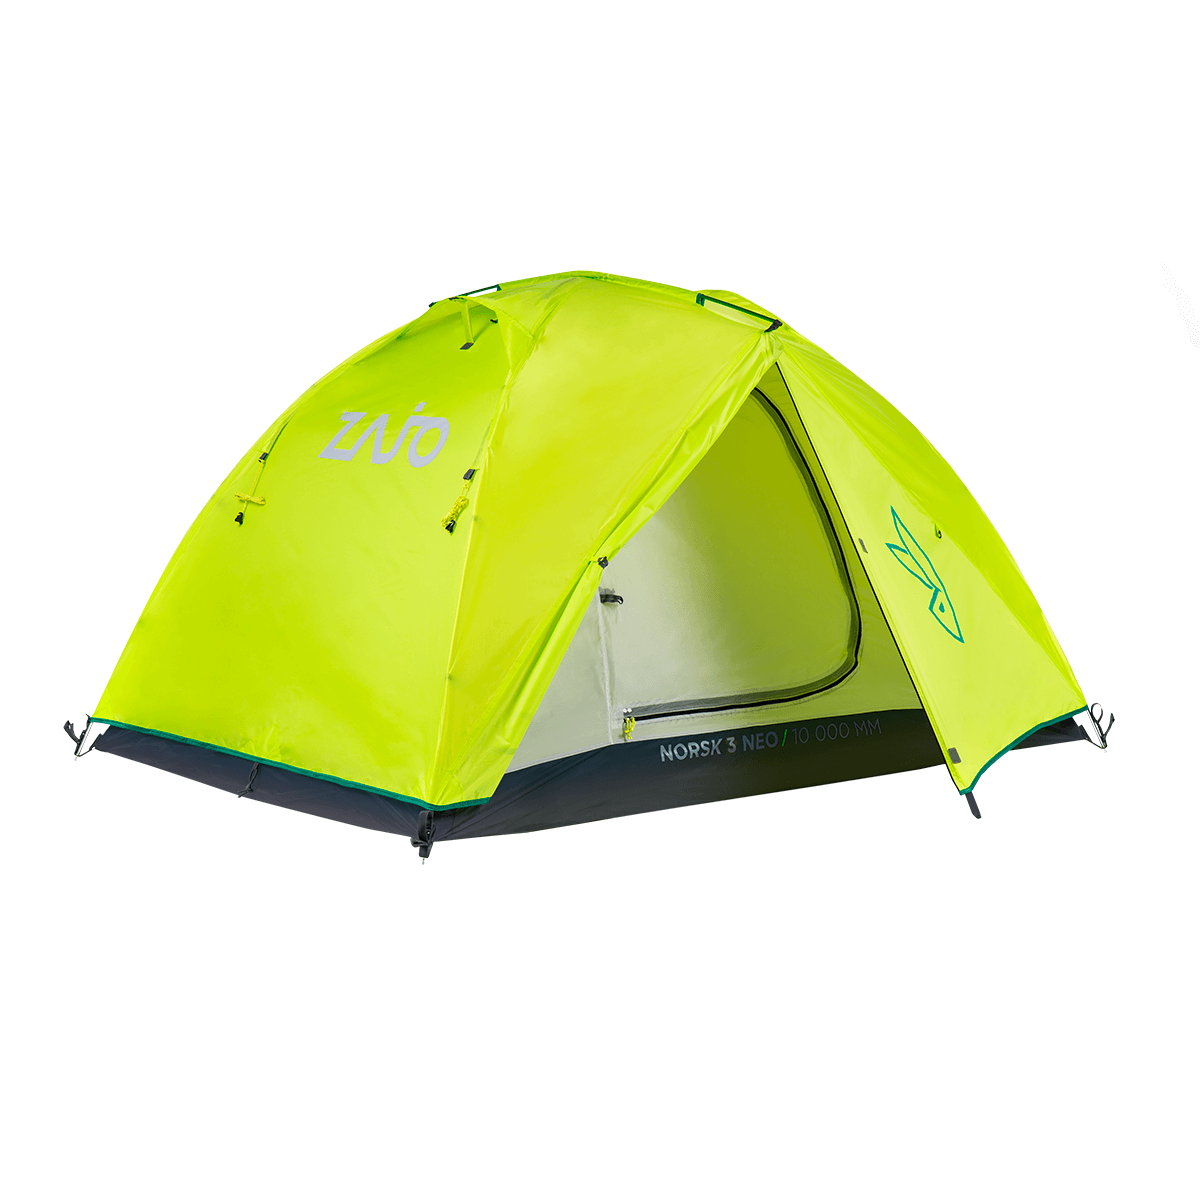 Stany Zajo Norsk 3 Neo Tent